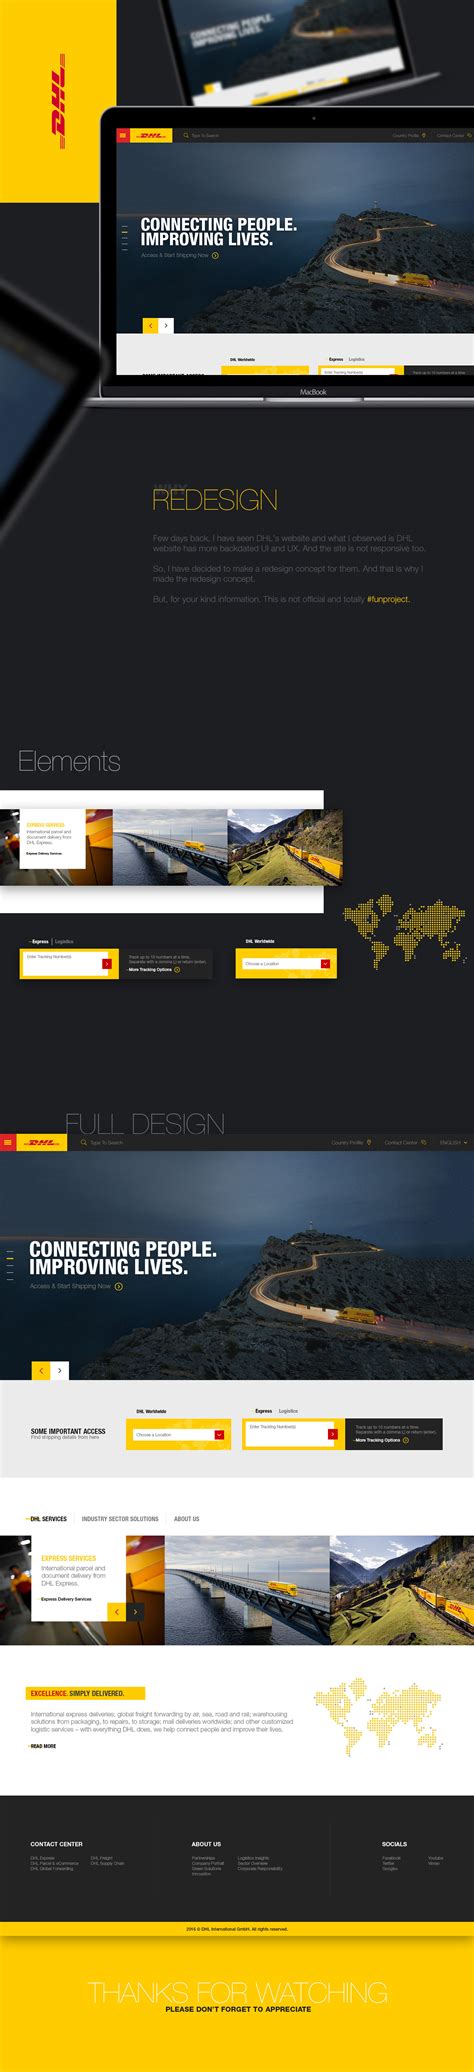 dhl website redesign concept fun project  behance